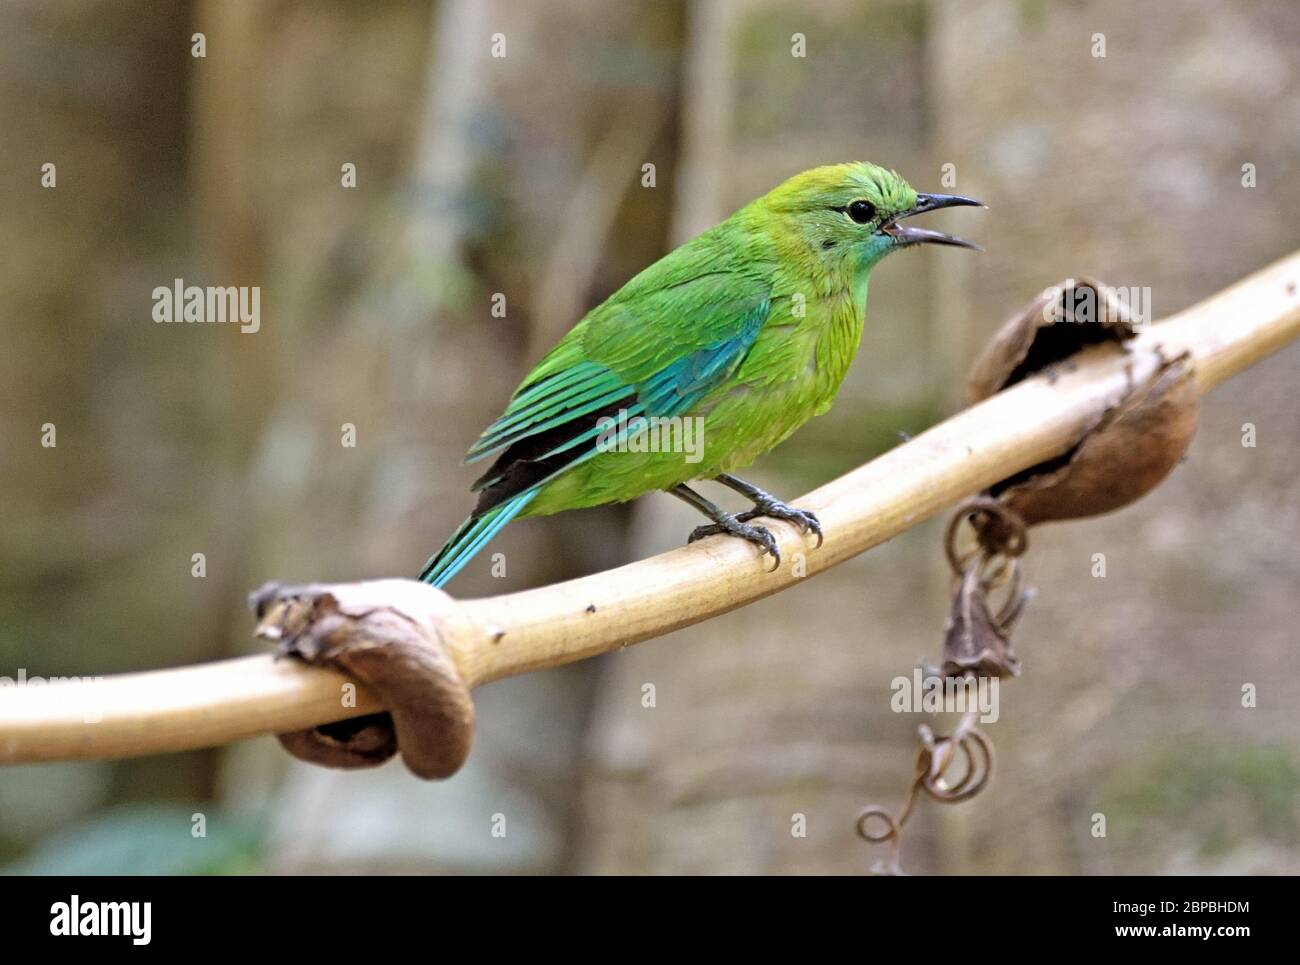 A female Blue-winged Leafbird (Chloropsis cochinchinensis) perched on a small branch in the forest in North Eastern Thailand Stock Photo